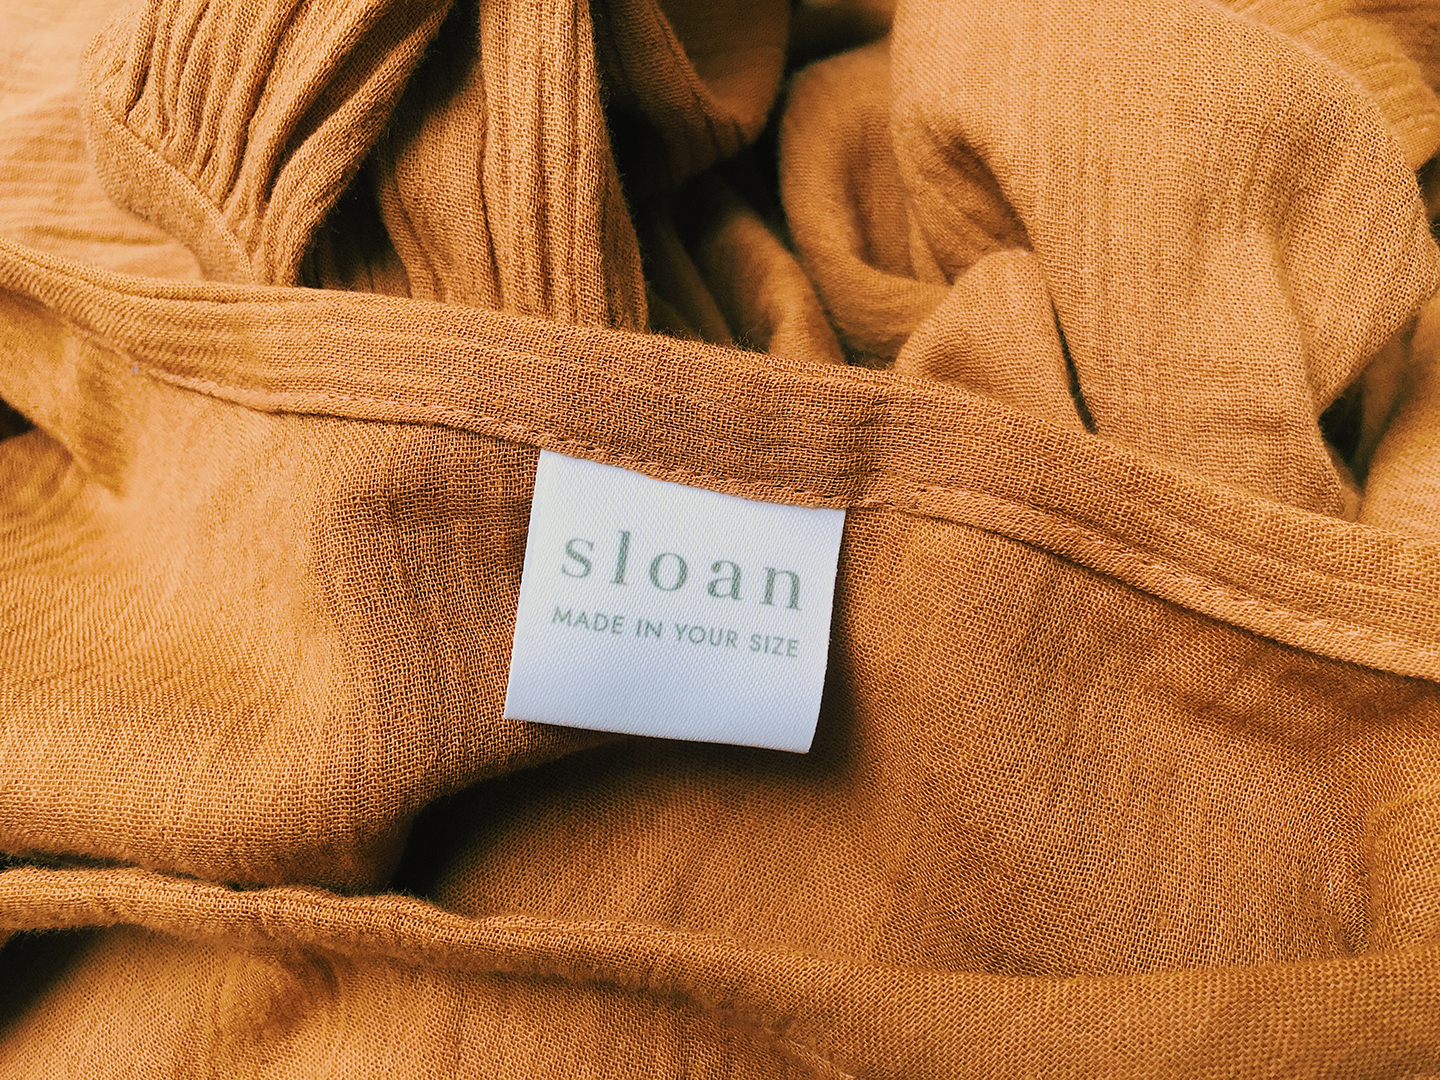 The label on my dress says: Sloan, made in your size